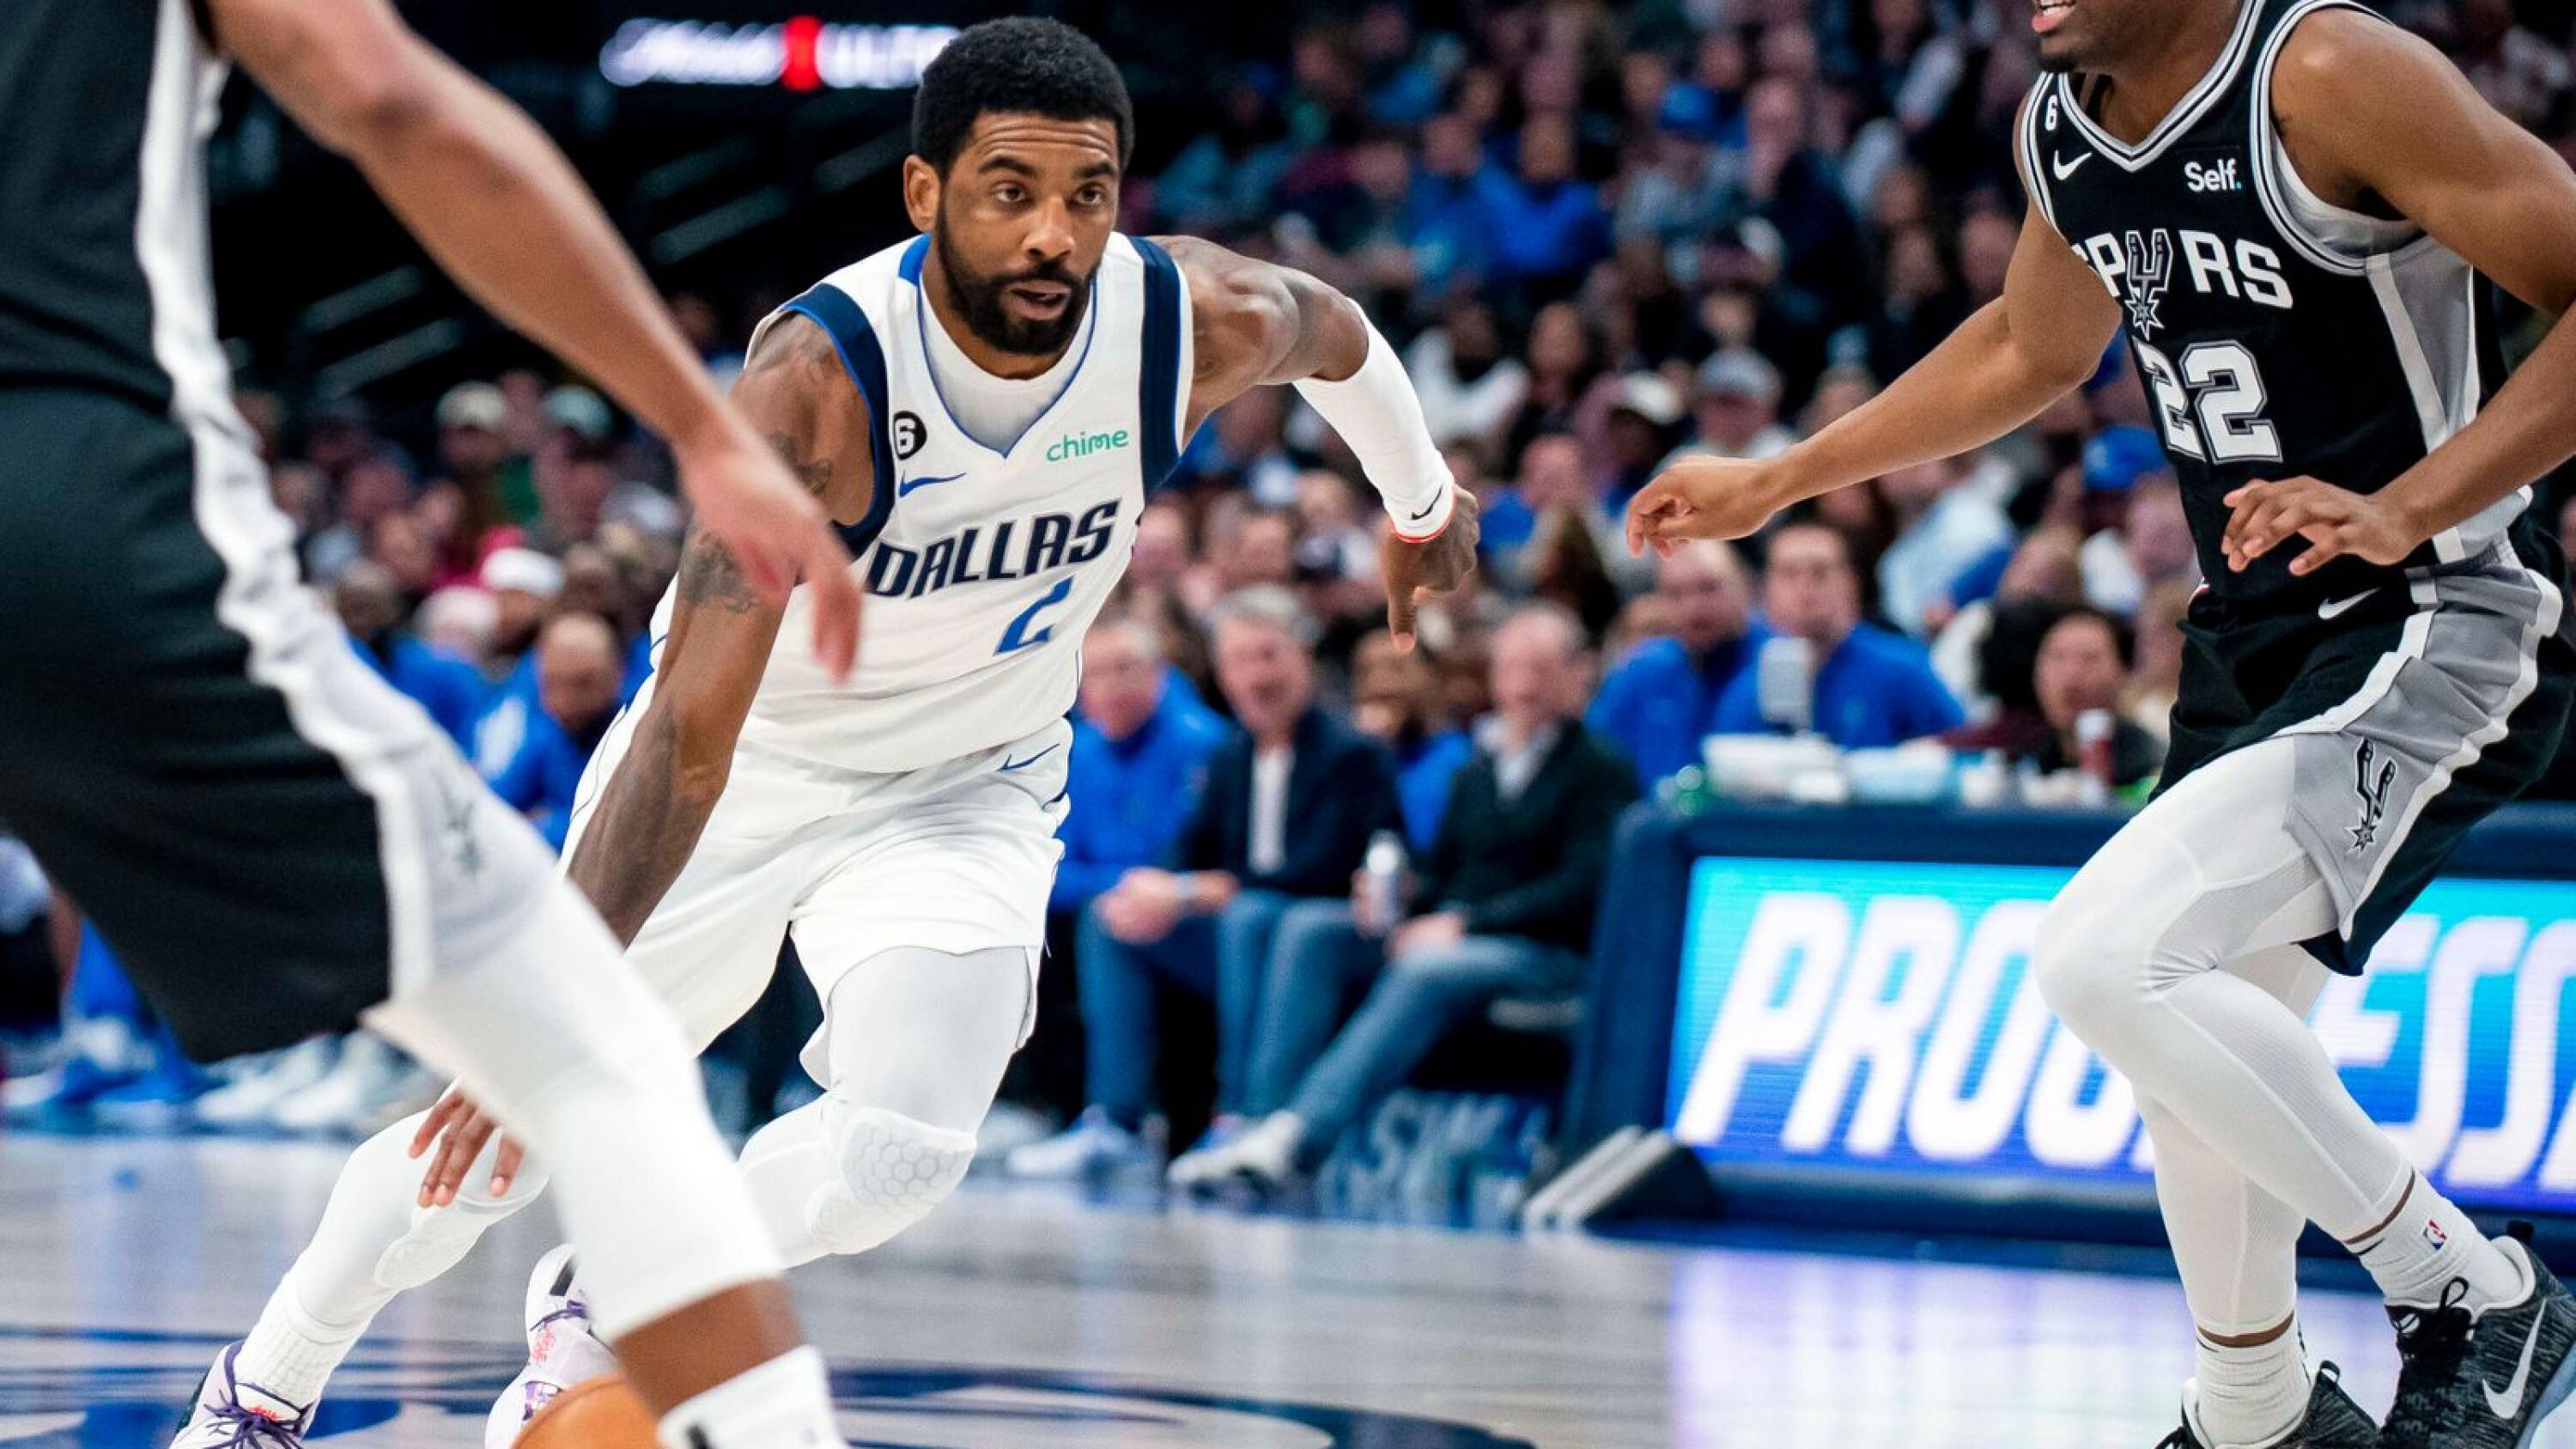 A look at the Dallas Mavericks' history in the Western Conference